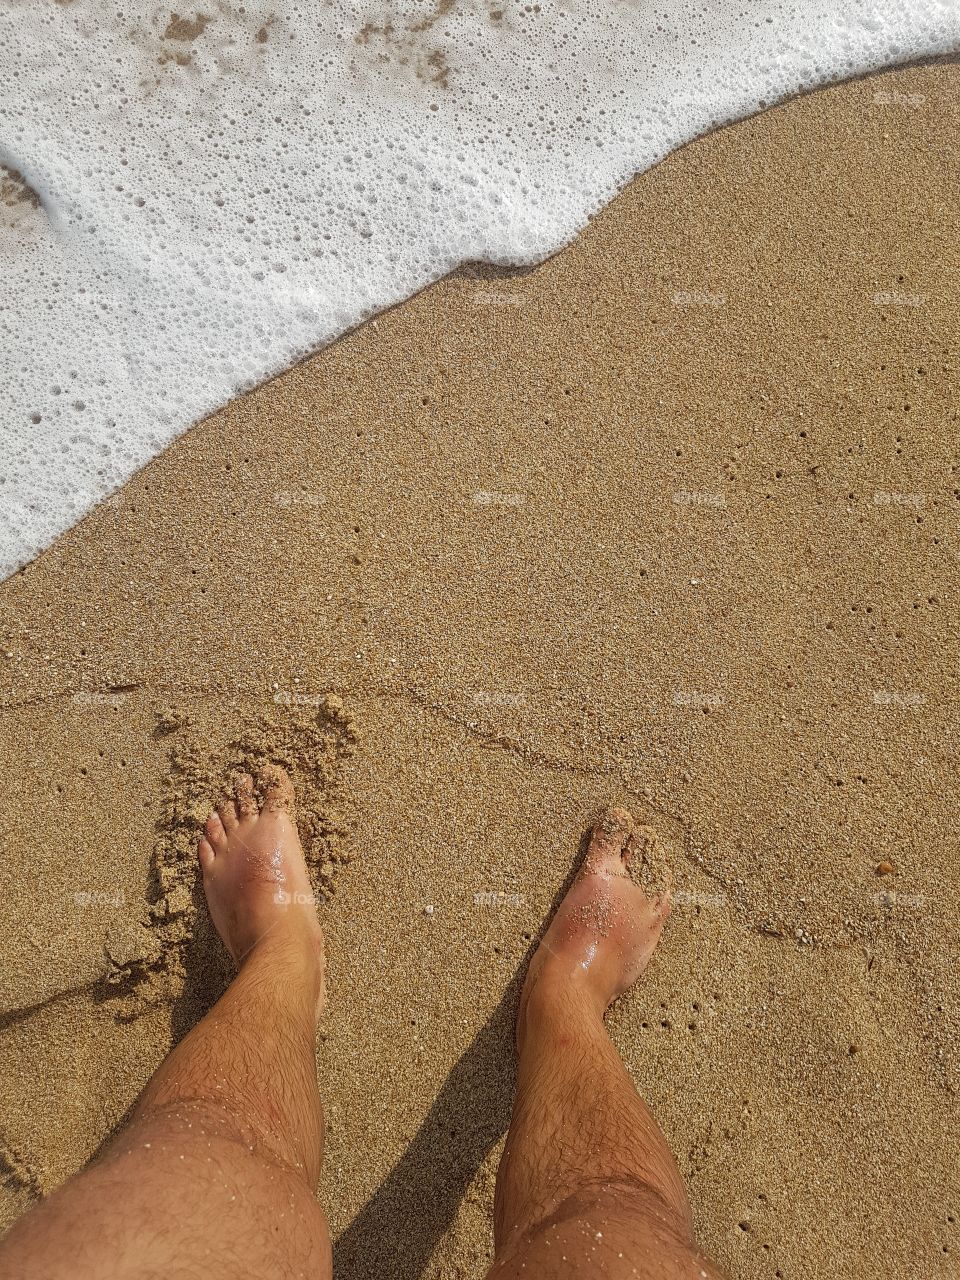 Legs in the water. Photopgraphed from above. Sand and salt water. Nice sunny day.